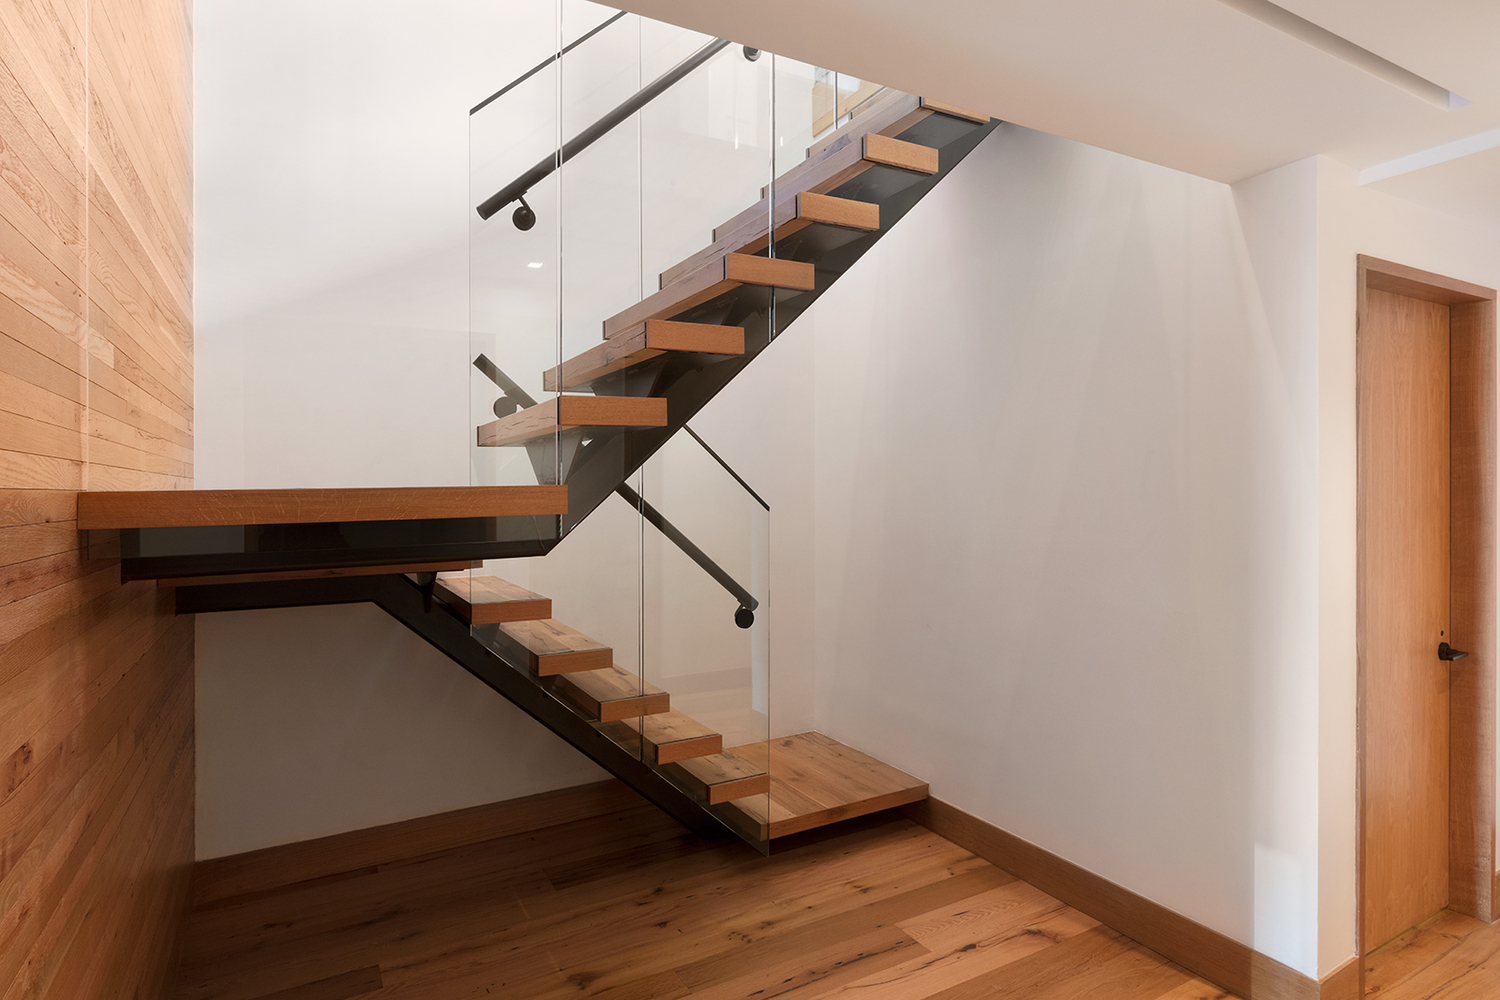 Wooden staircase with glass railing inside a luxury apartment featuring MEP work done by New York firm, 2L Engineering.